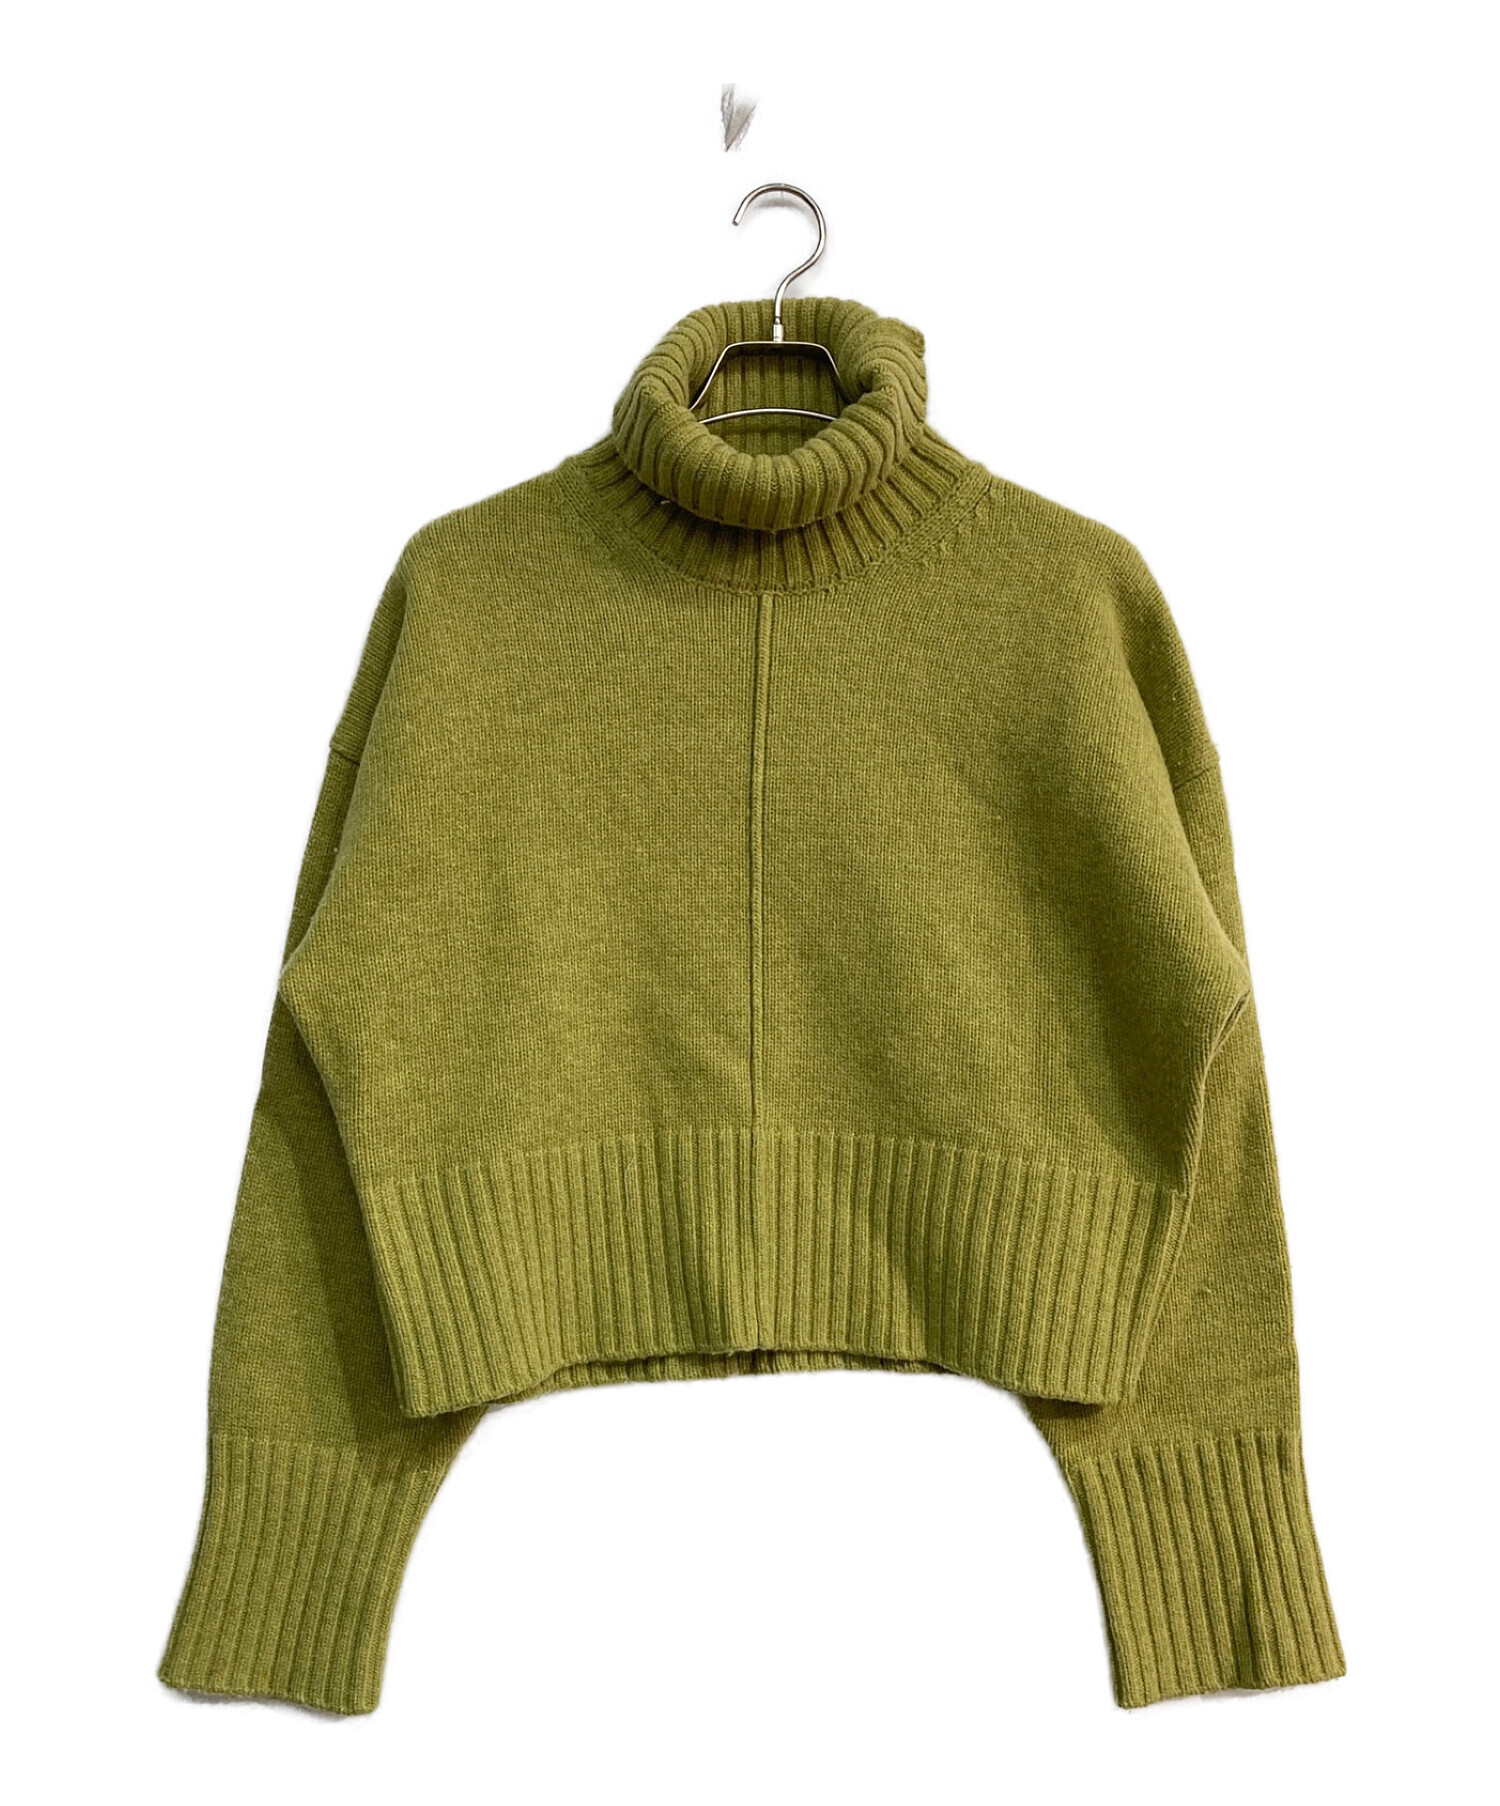 22AW ヘビータートルニット heavy turtle knitお値段変更させて頂きました